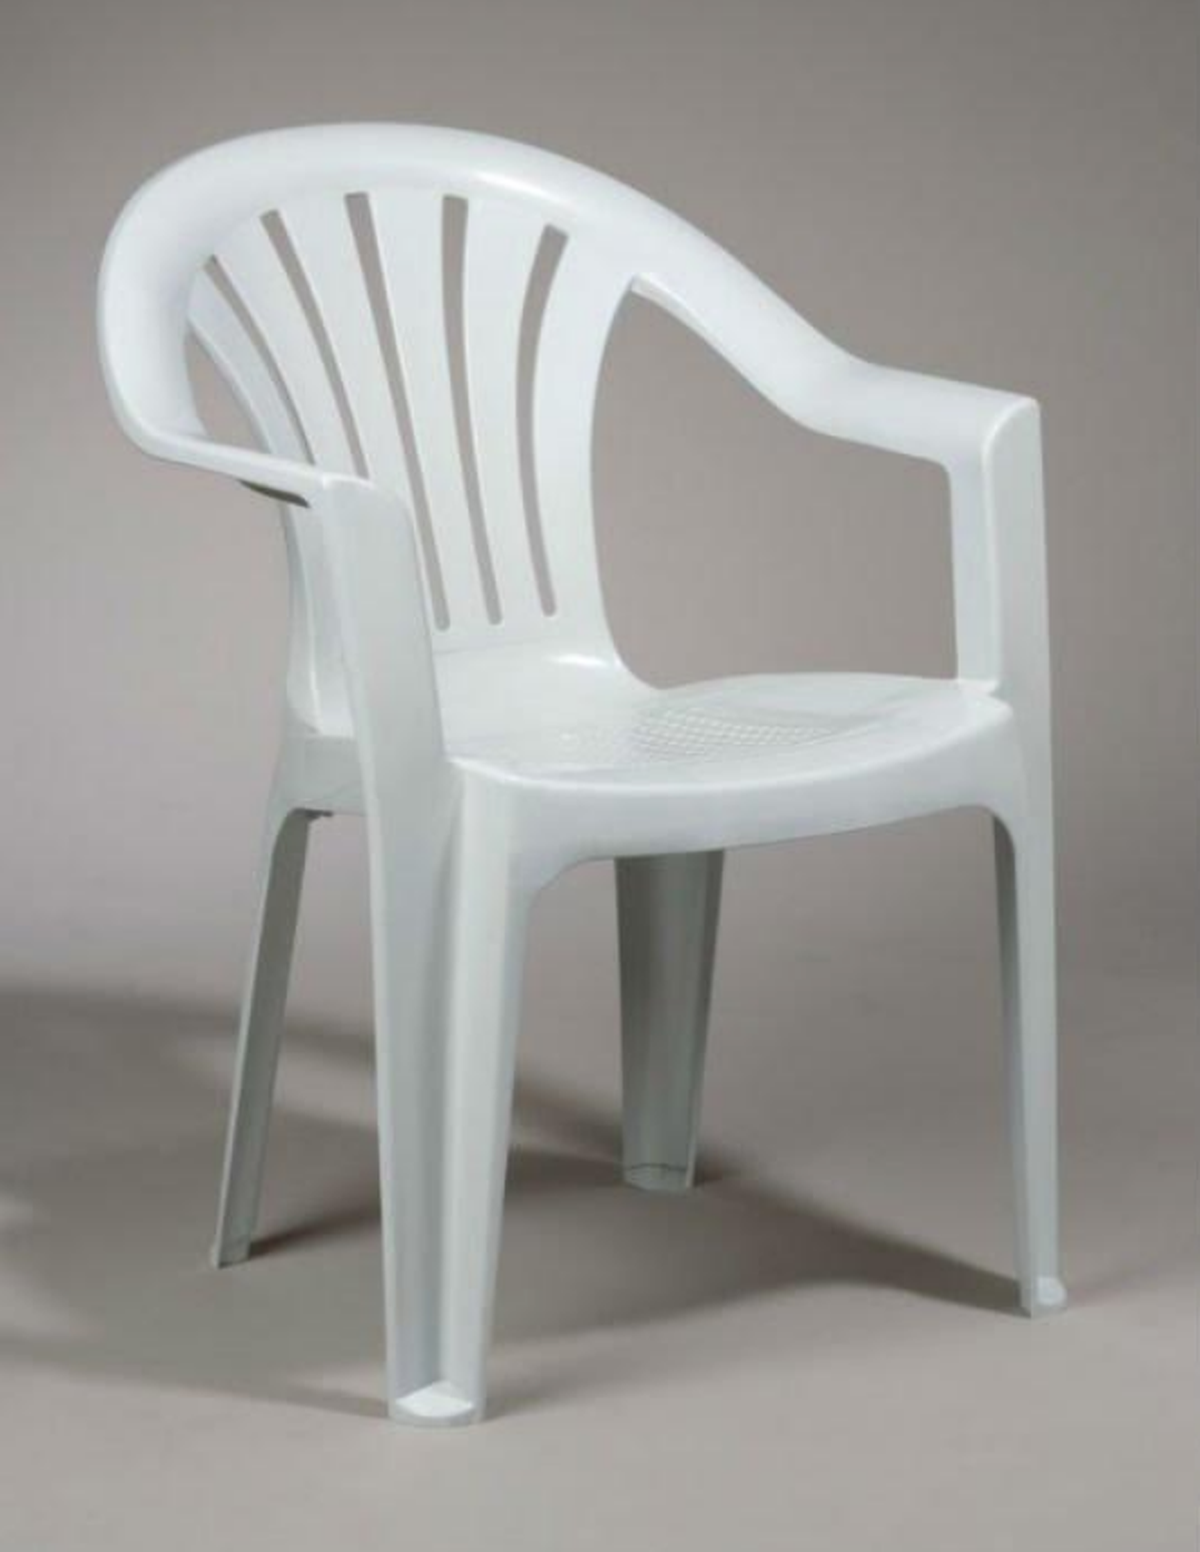 Plastic Chairs For Sale Chairs Plastic Patio Each Furniture Sold